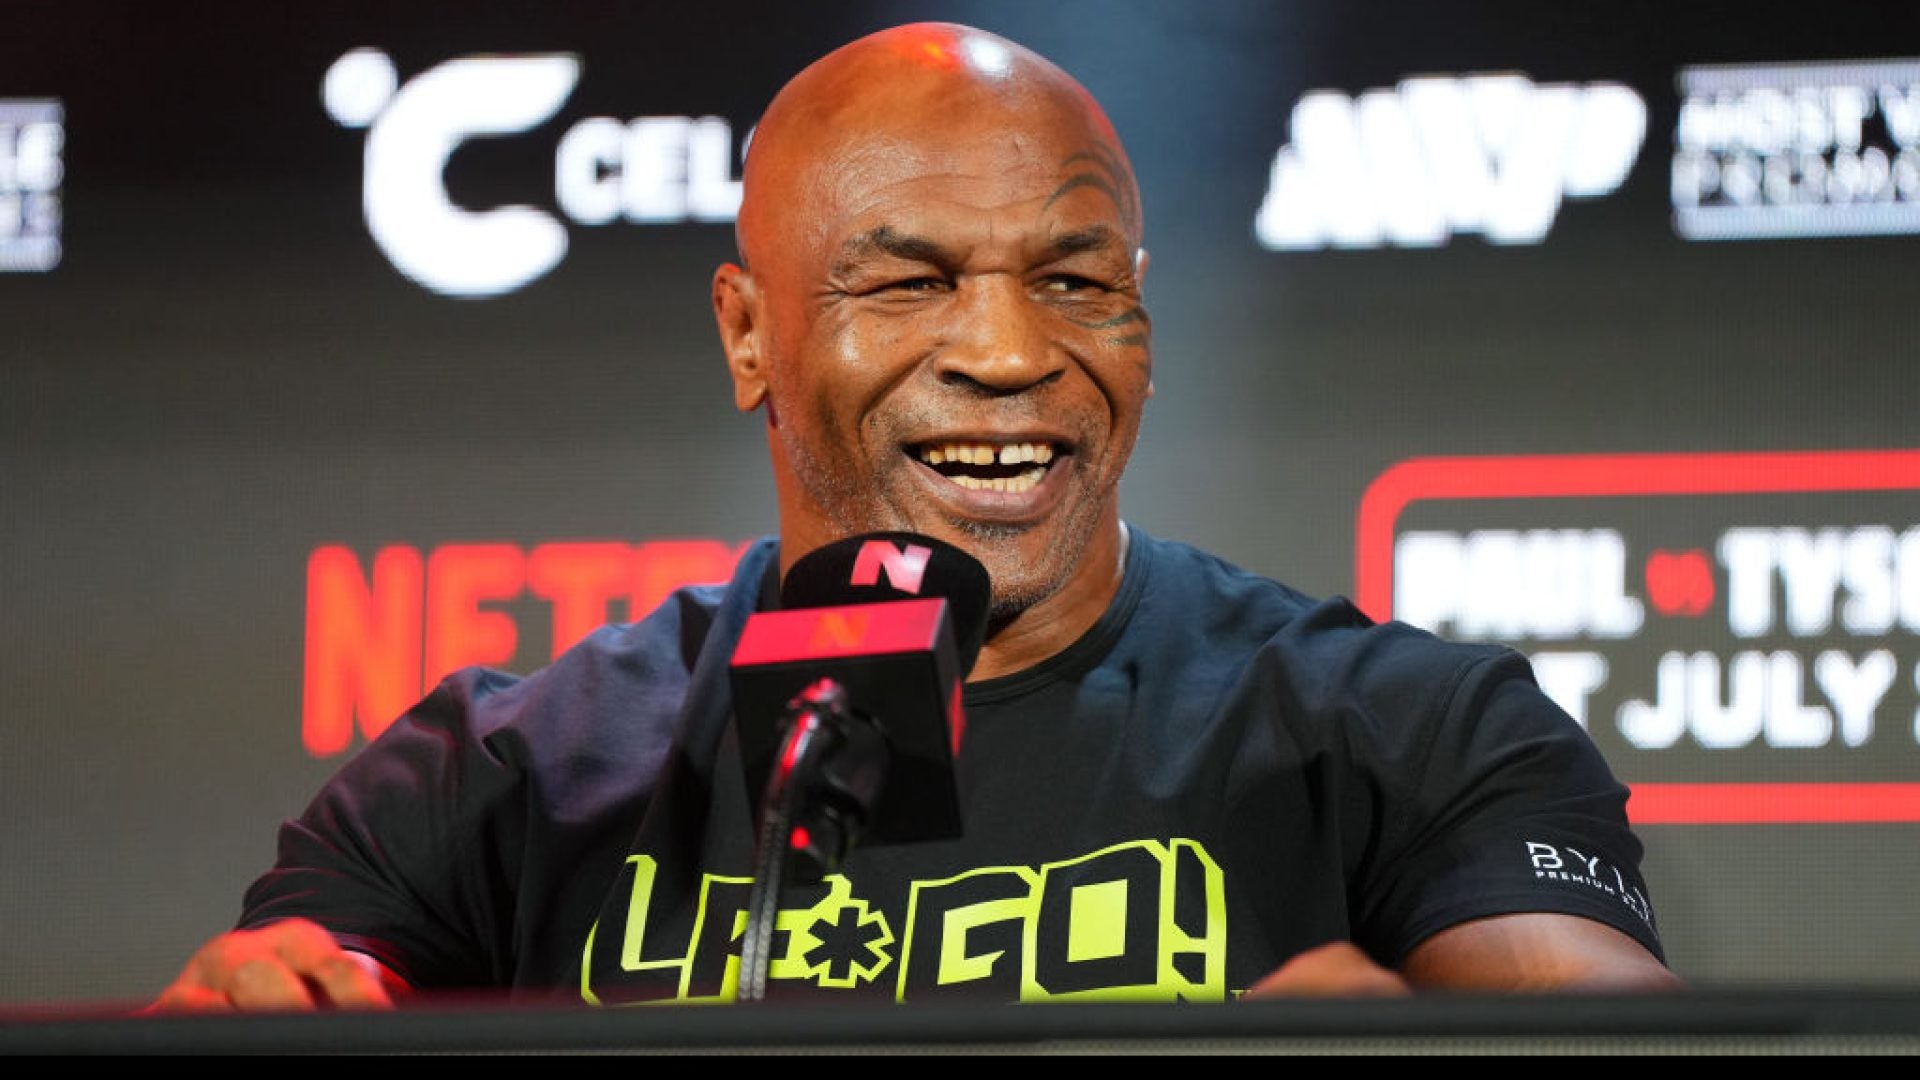 Having Already Conquered Cannabis, Mike Tyson Is Now Launching Into the Shroom Industry With "Mikeadelics"